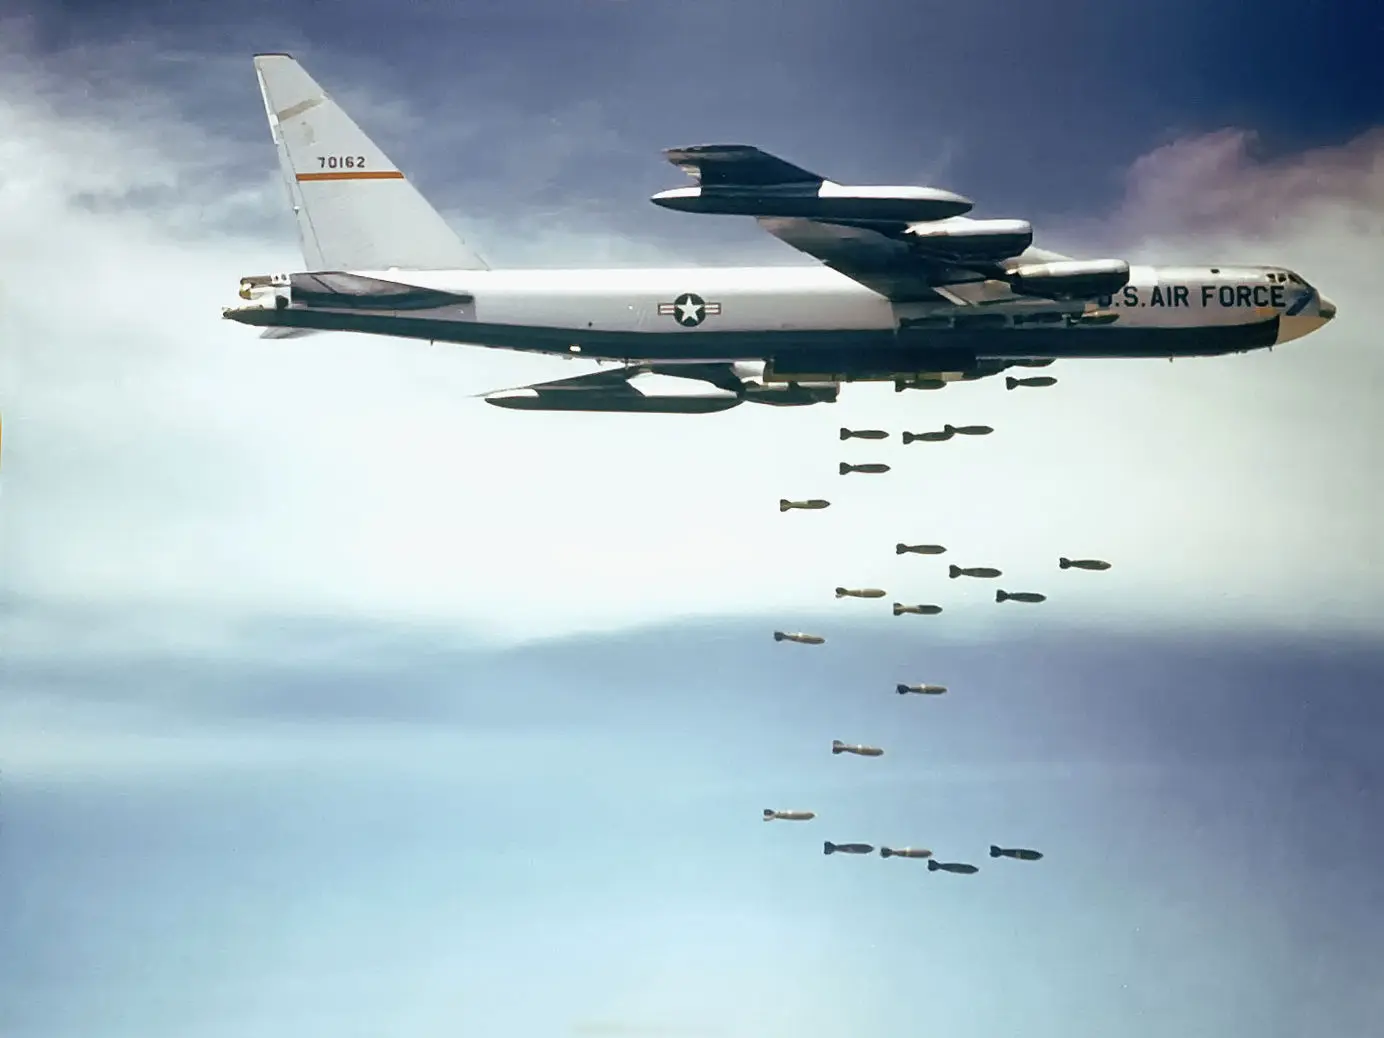 The B-52 has been used in many conflicts.